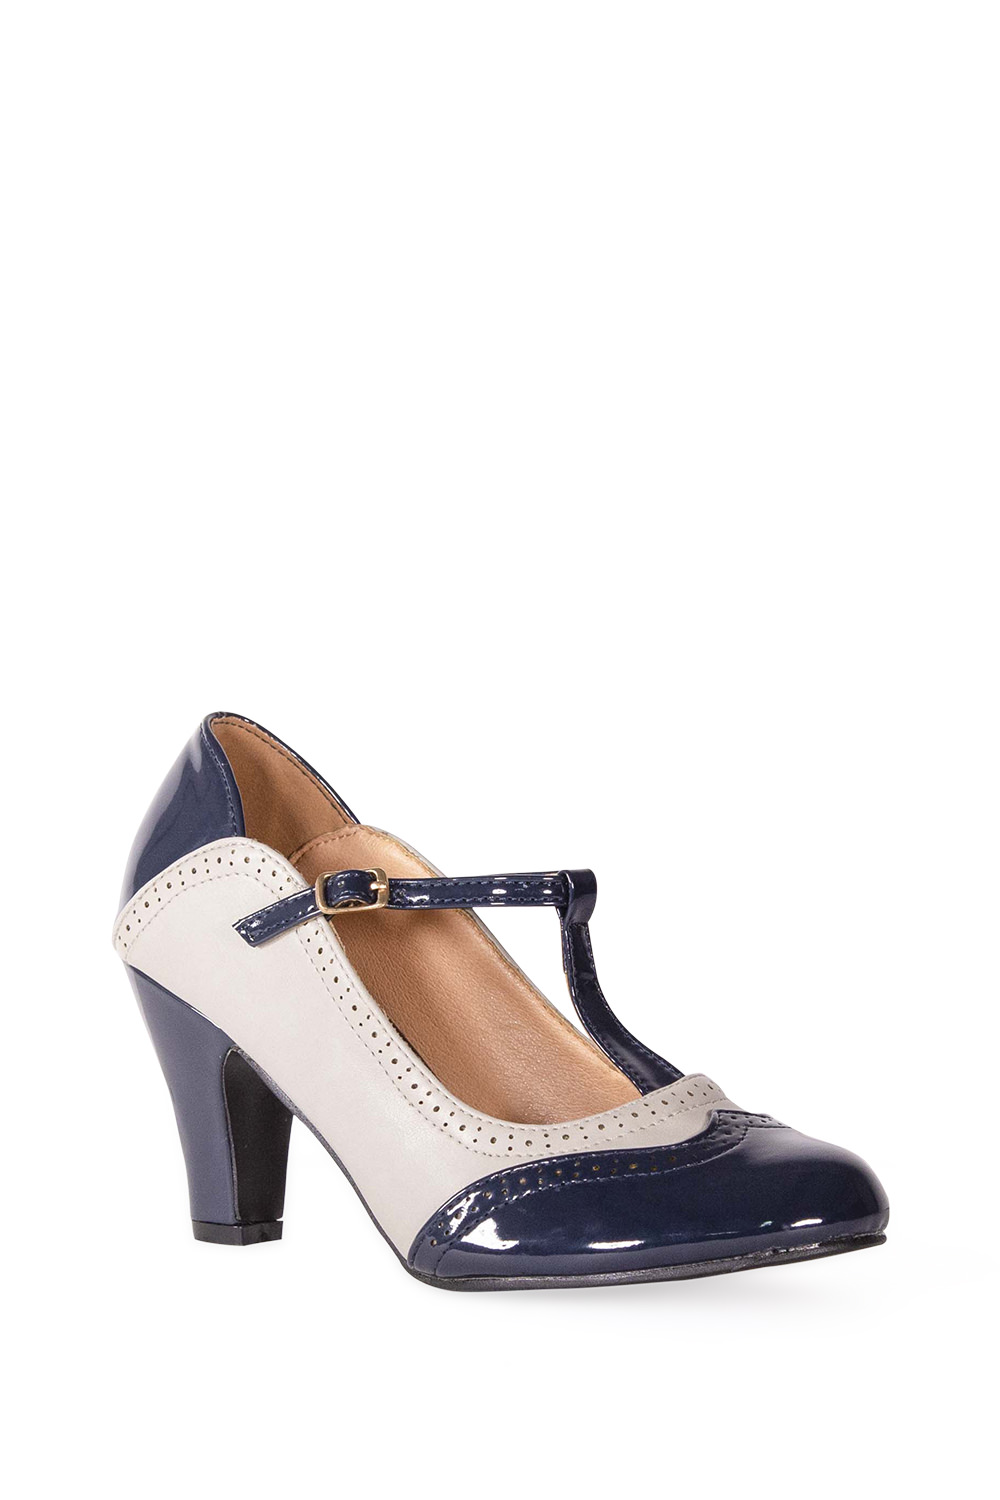 Banned Retro 50s Diva Blues T Strap Pumps In Navy And Grey